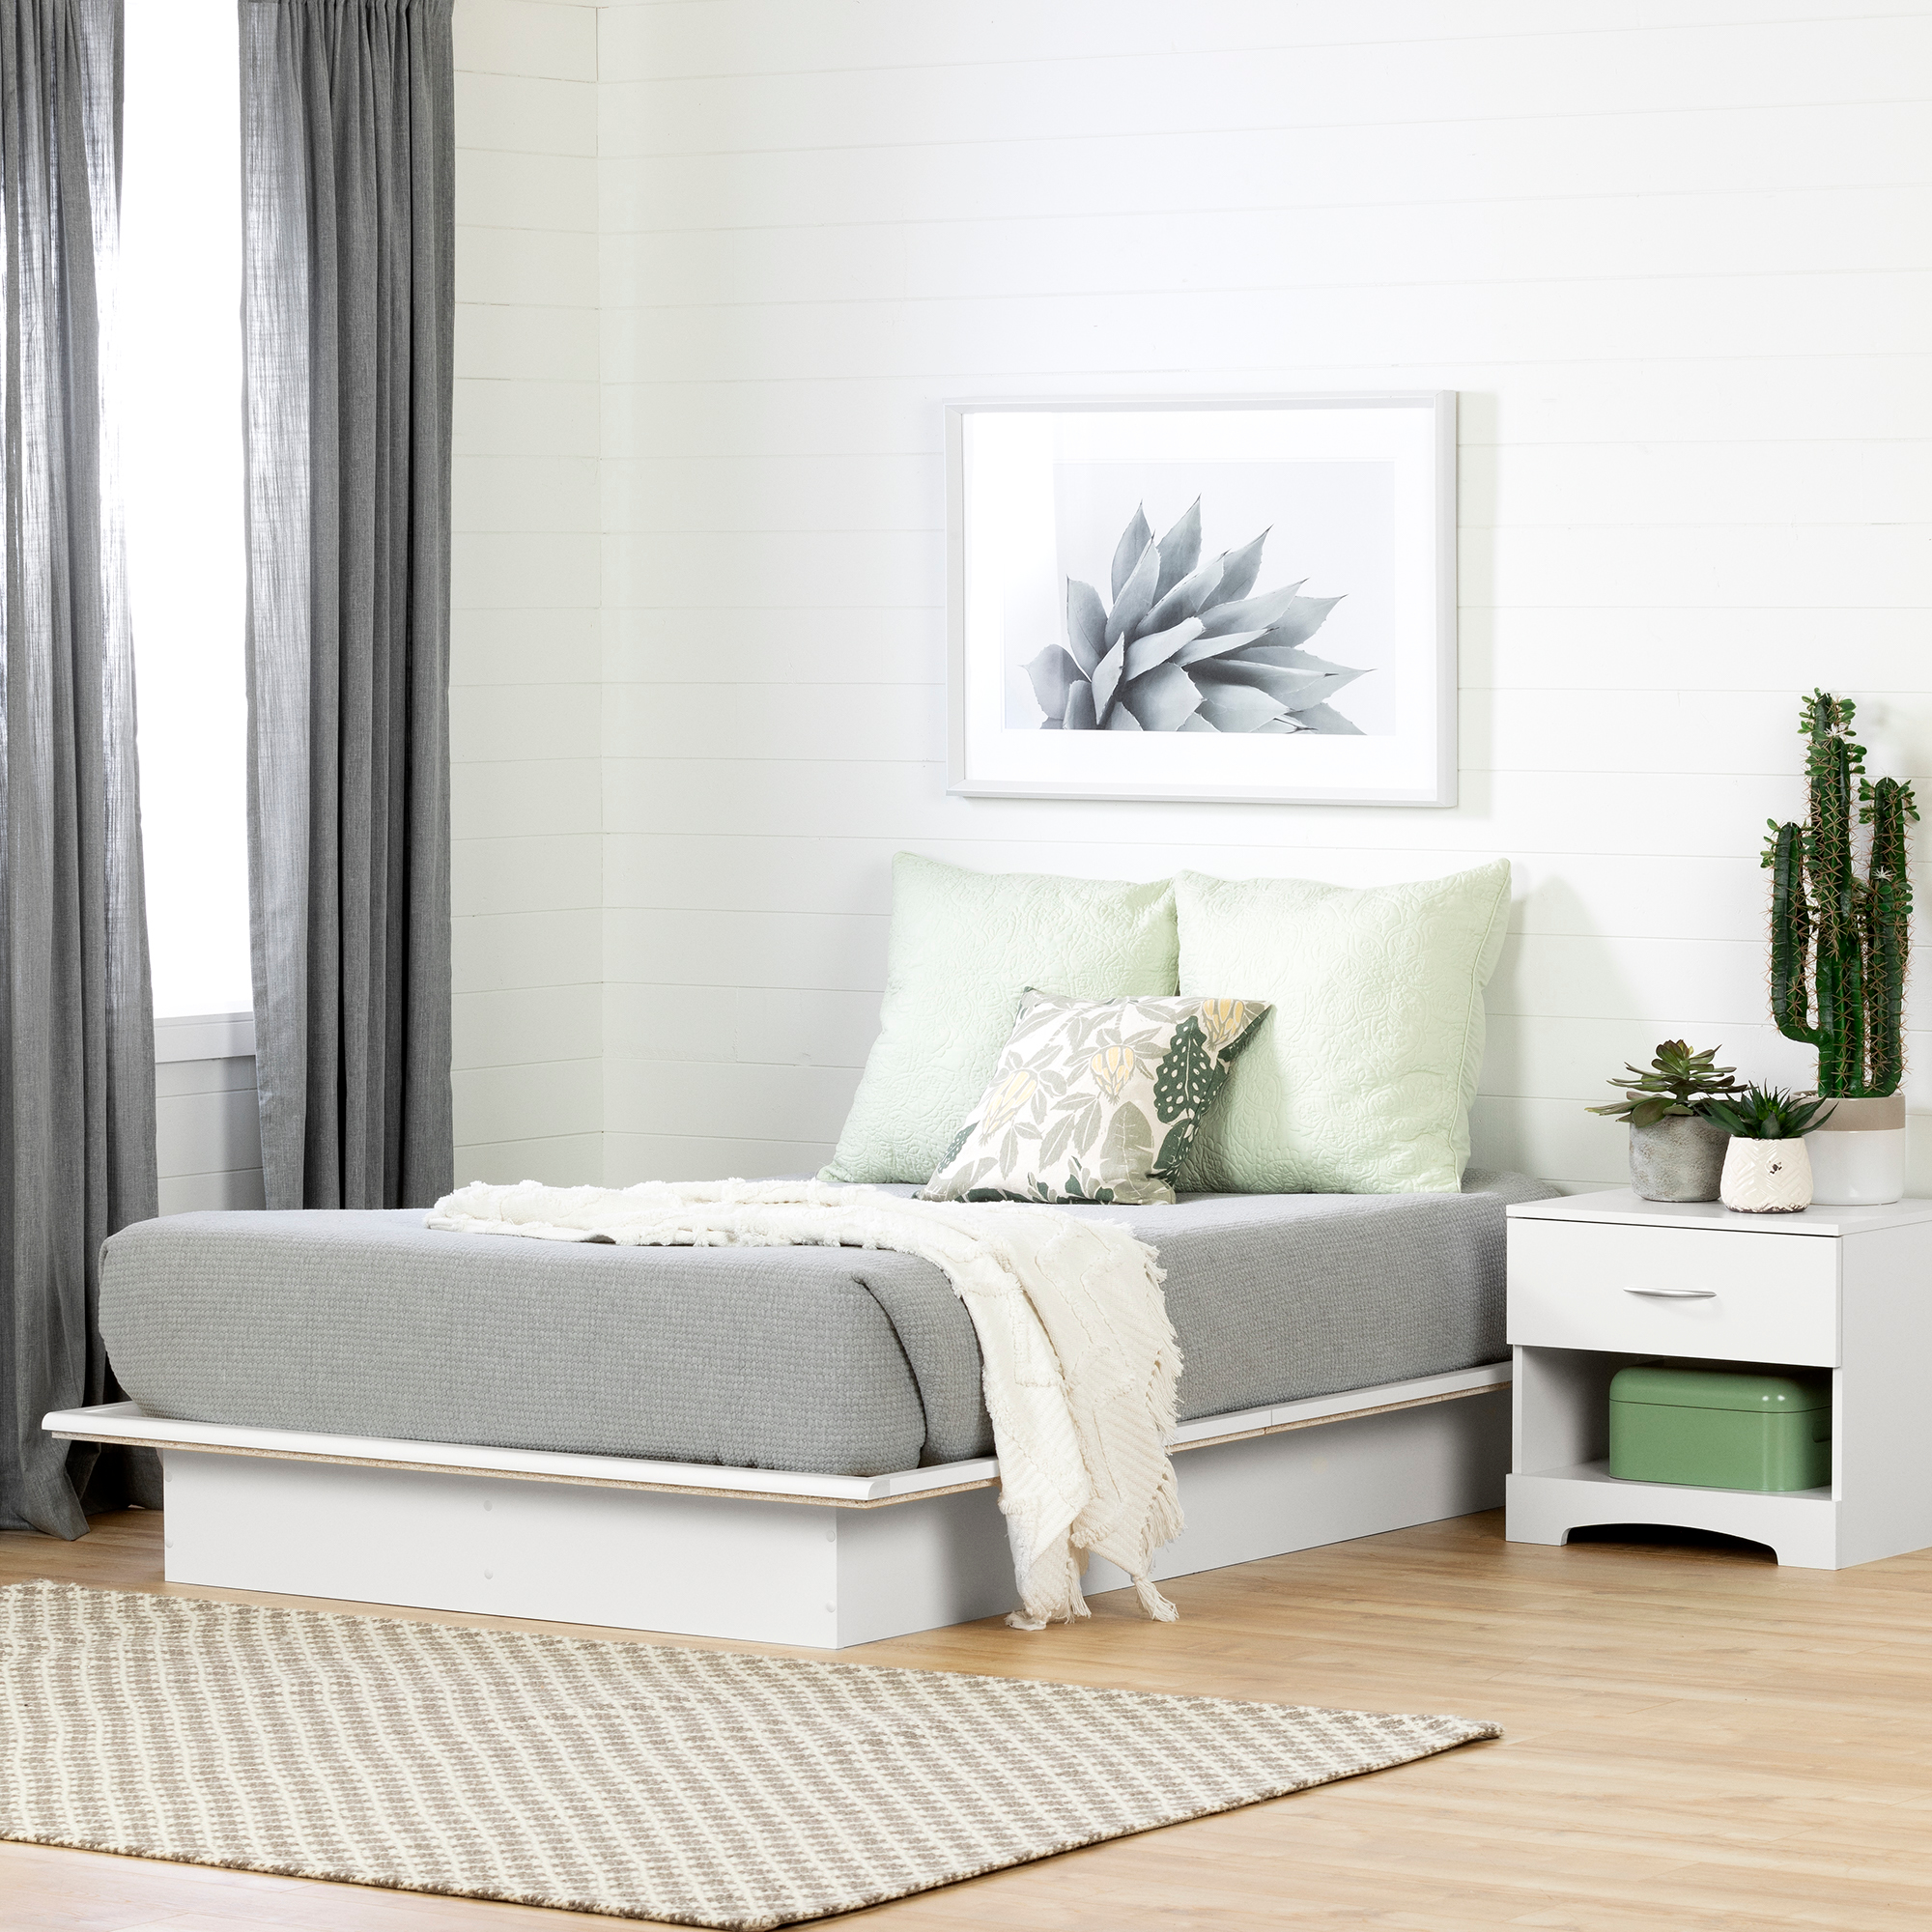 South Shore Basics Platform Bed with Molding, Pure White, Full - image 1 of 6